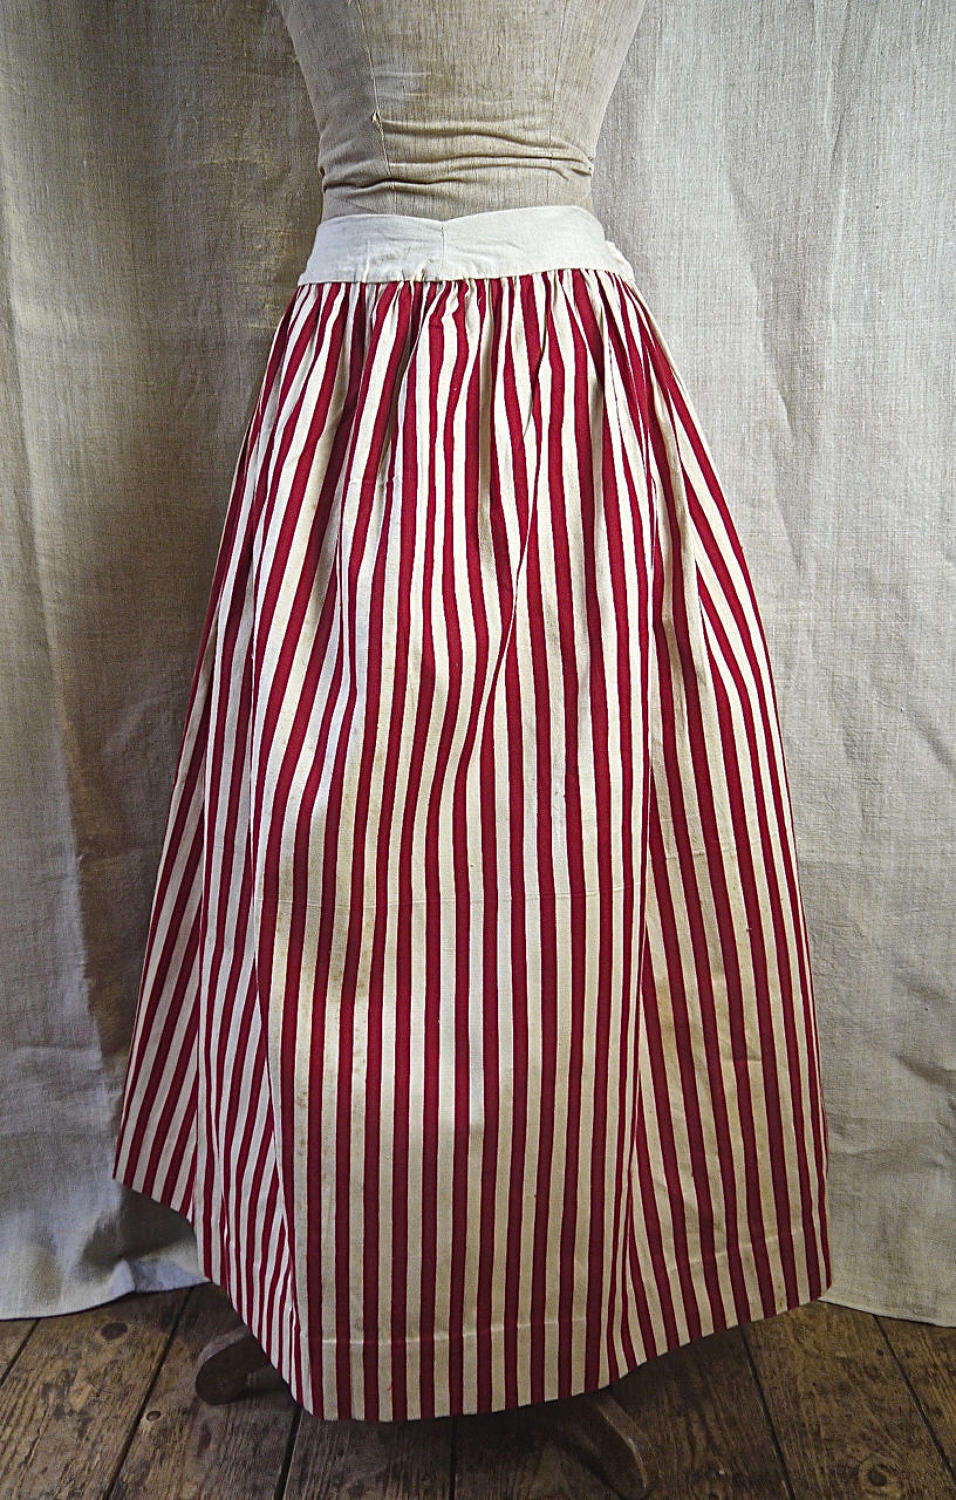 Red Striped Cotton Jupon French 19th Century